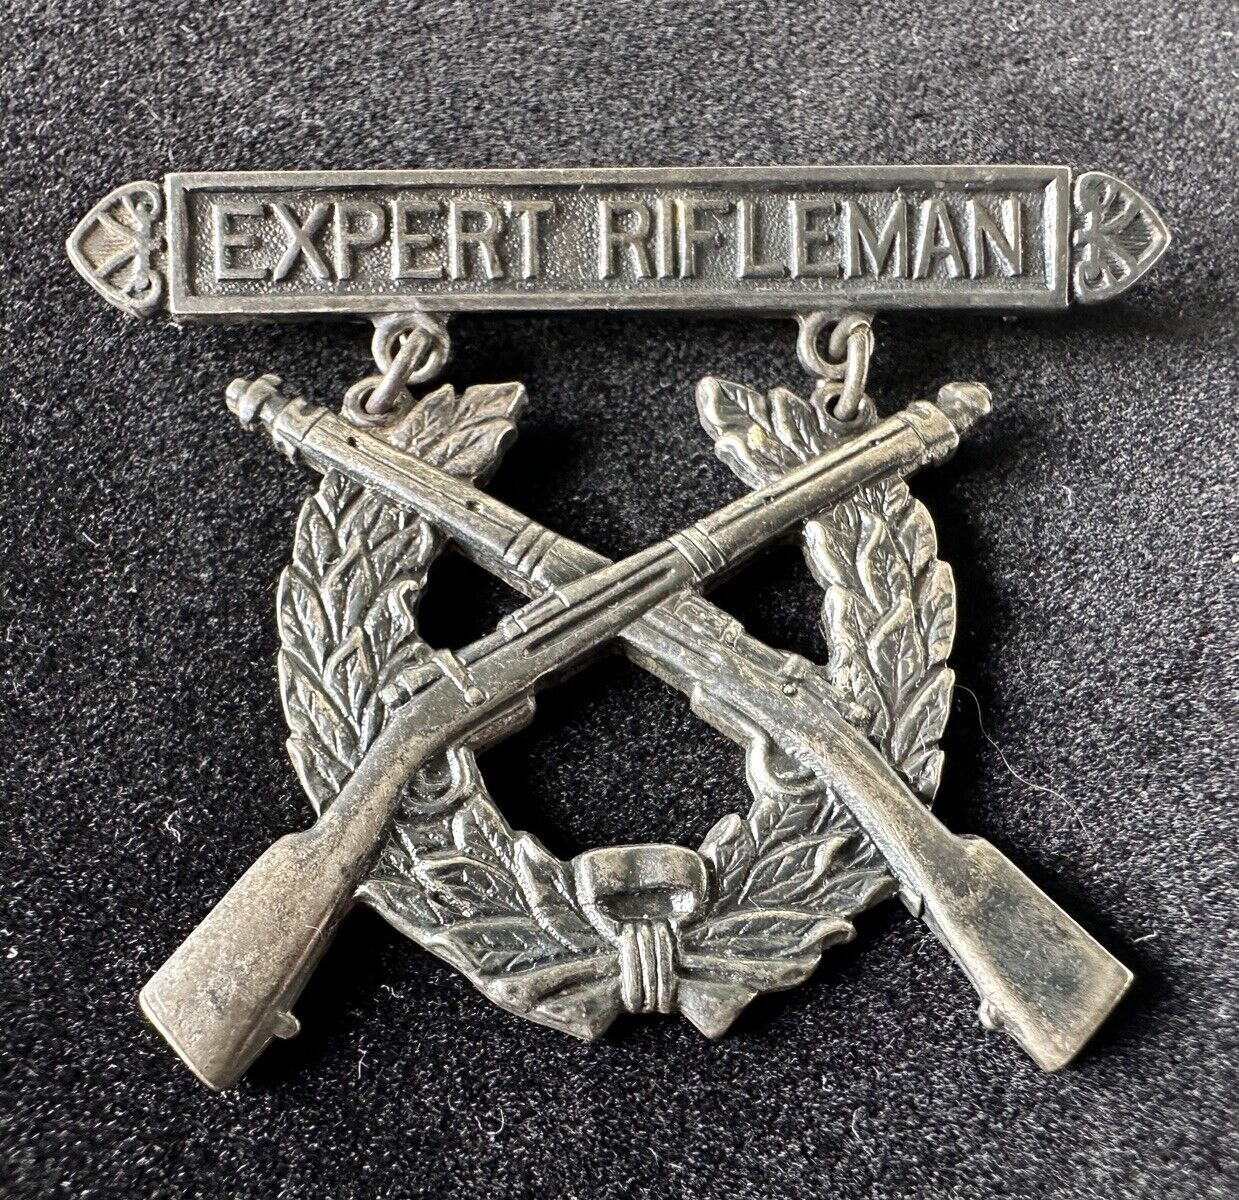 WWI to WWII U.S Marine Corps Rifle Expert Rifleman Pin Sterling Silver